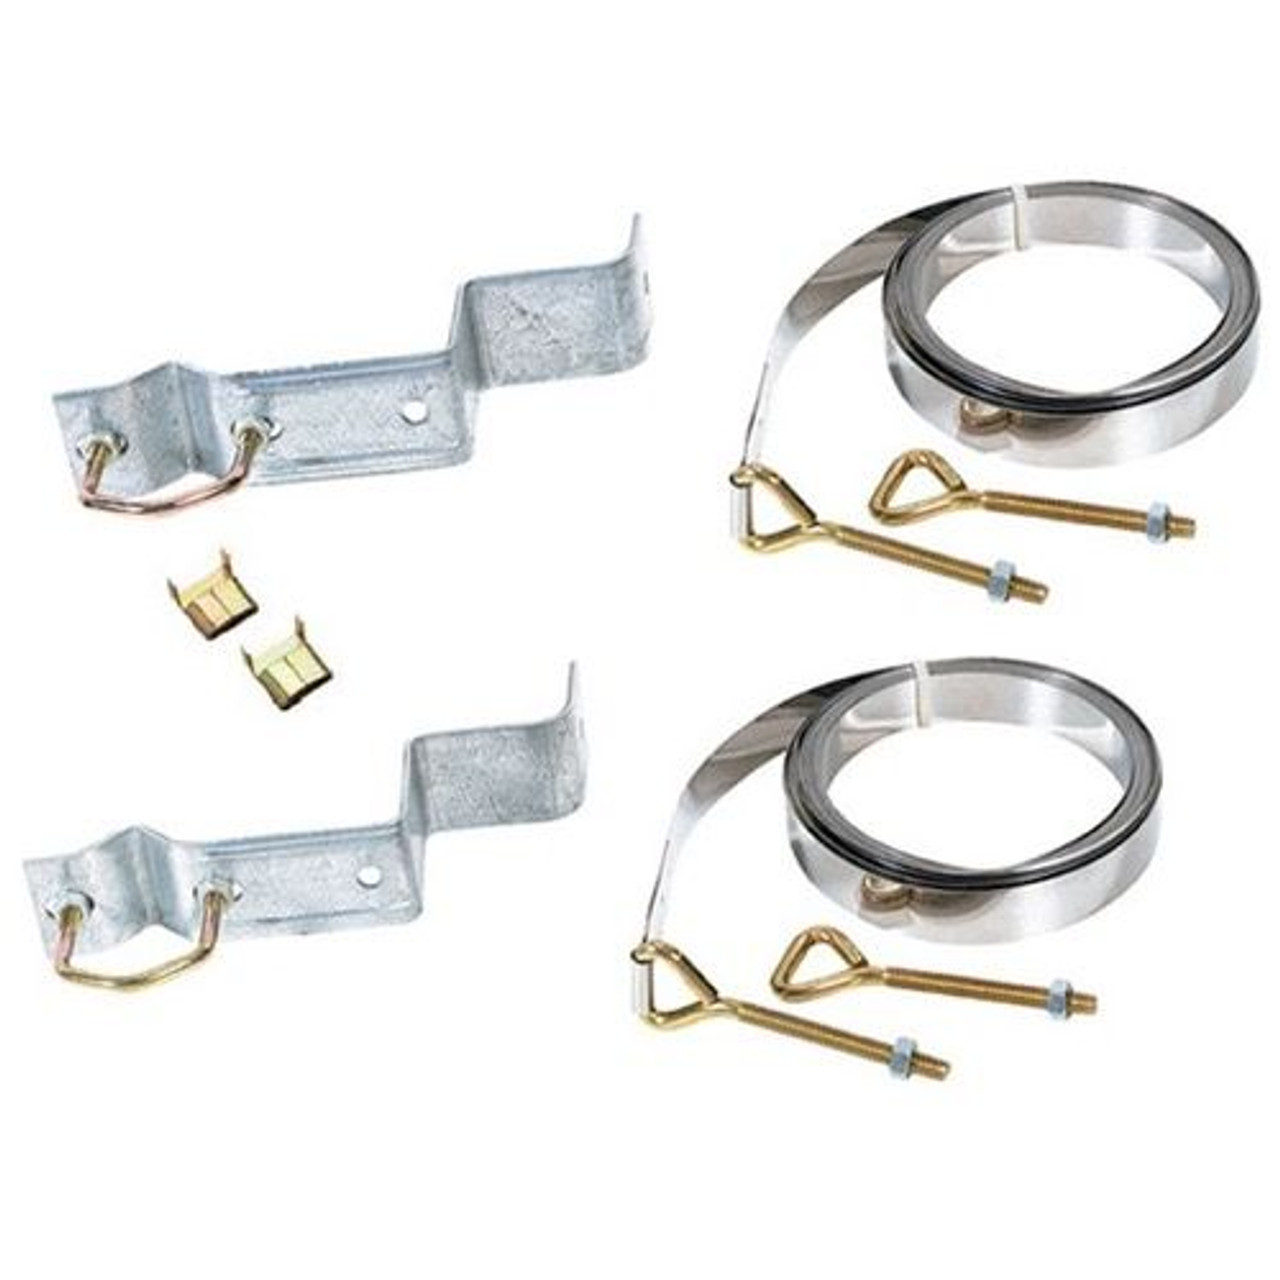 Steren 10' FT Z Type Chimney Mount Kit Contains 10' FT Galvanized Strap Brackets TV Aerial Support Complete Outdoor Off-Air Local Signal Mounting Hardware